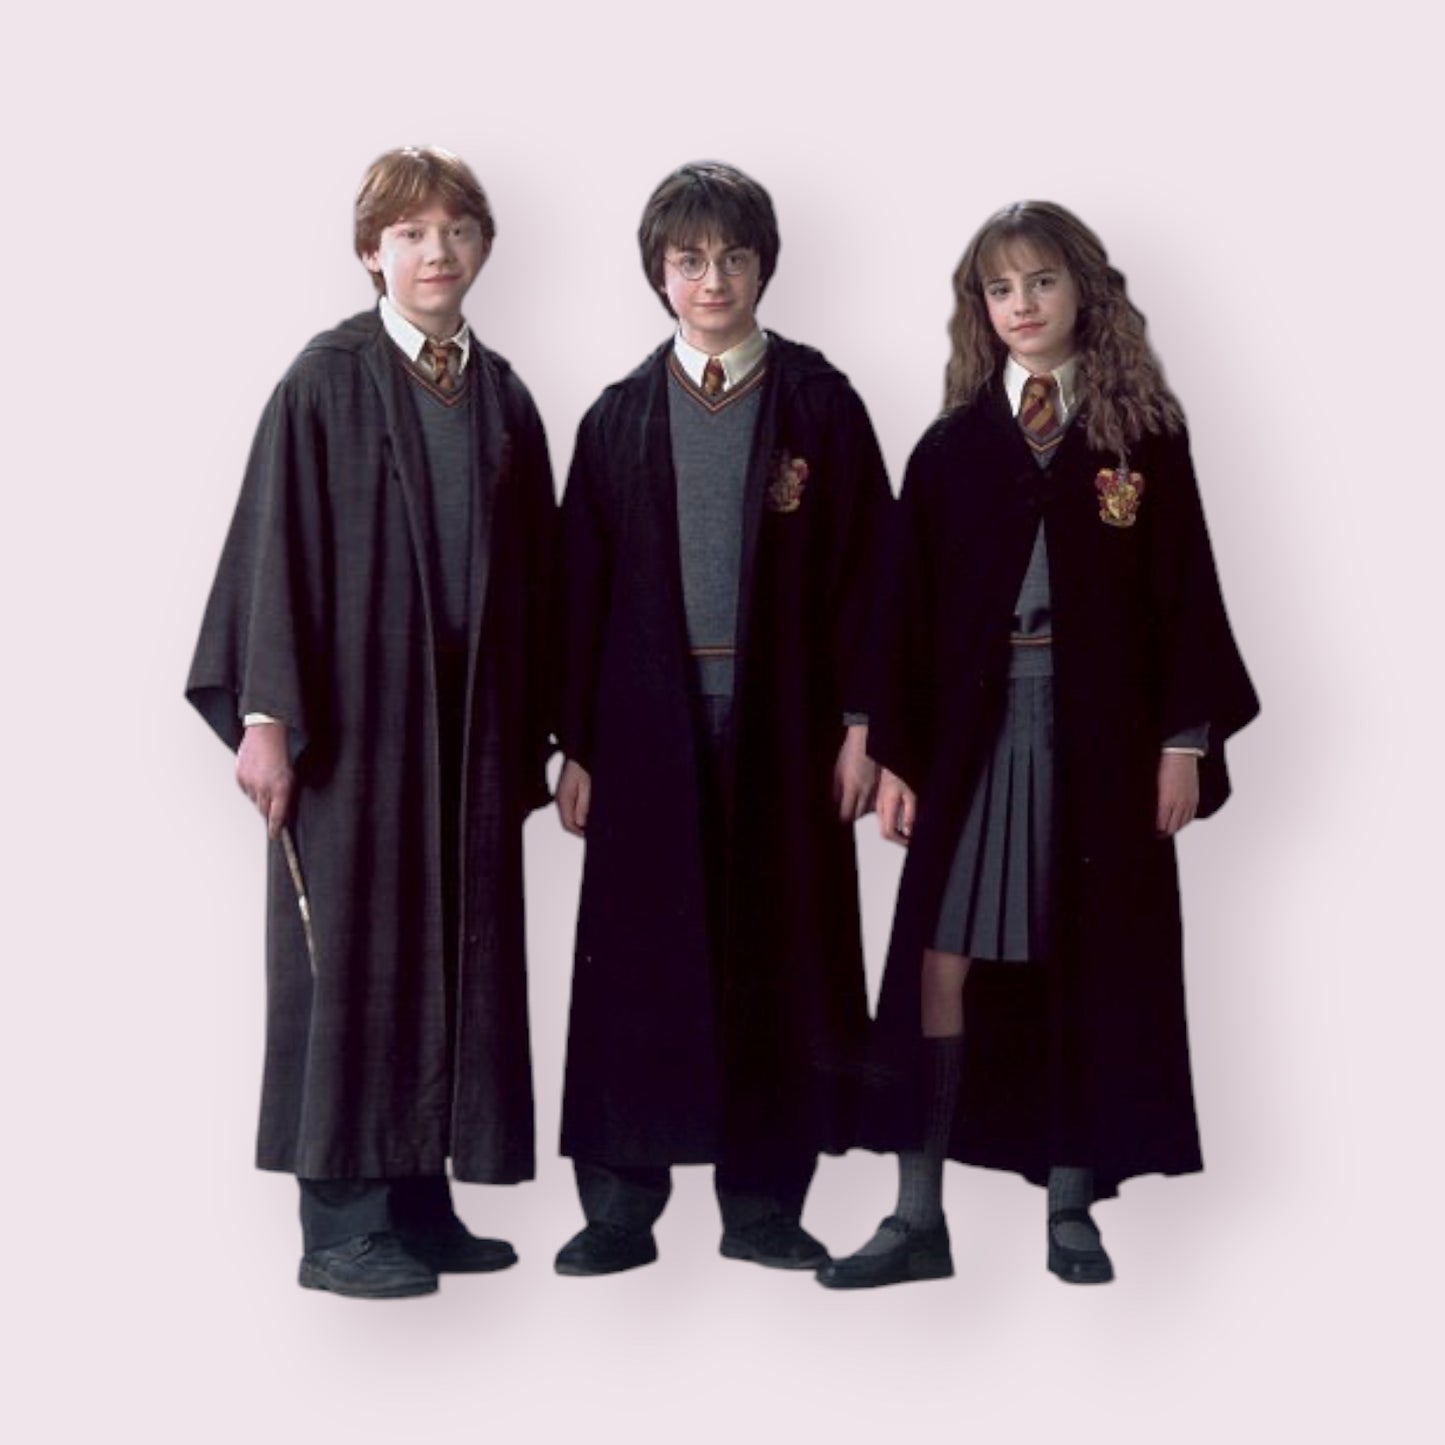 Harry Potter Robes  Pixie Candy Shoppe   